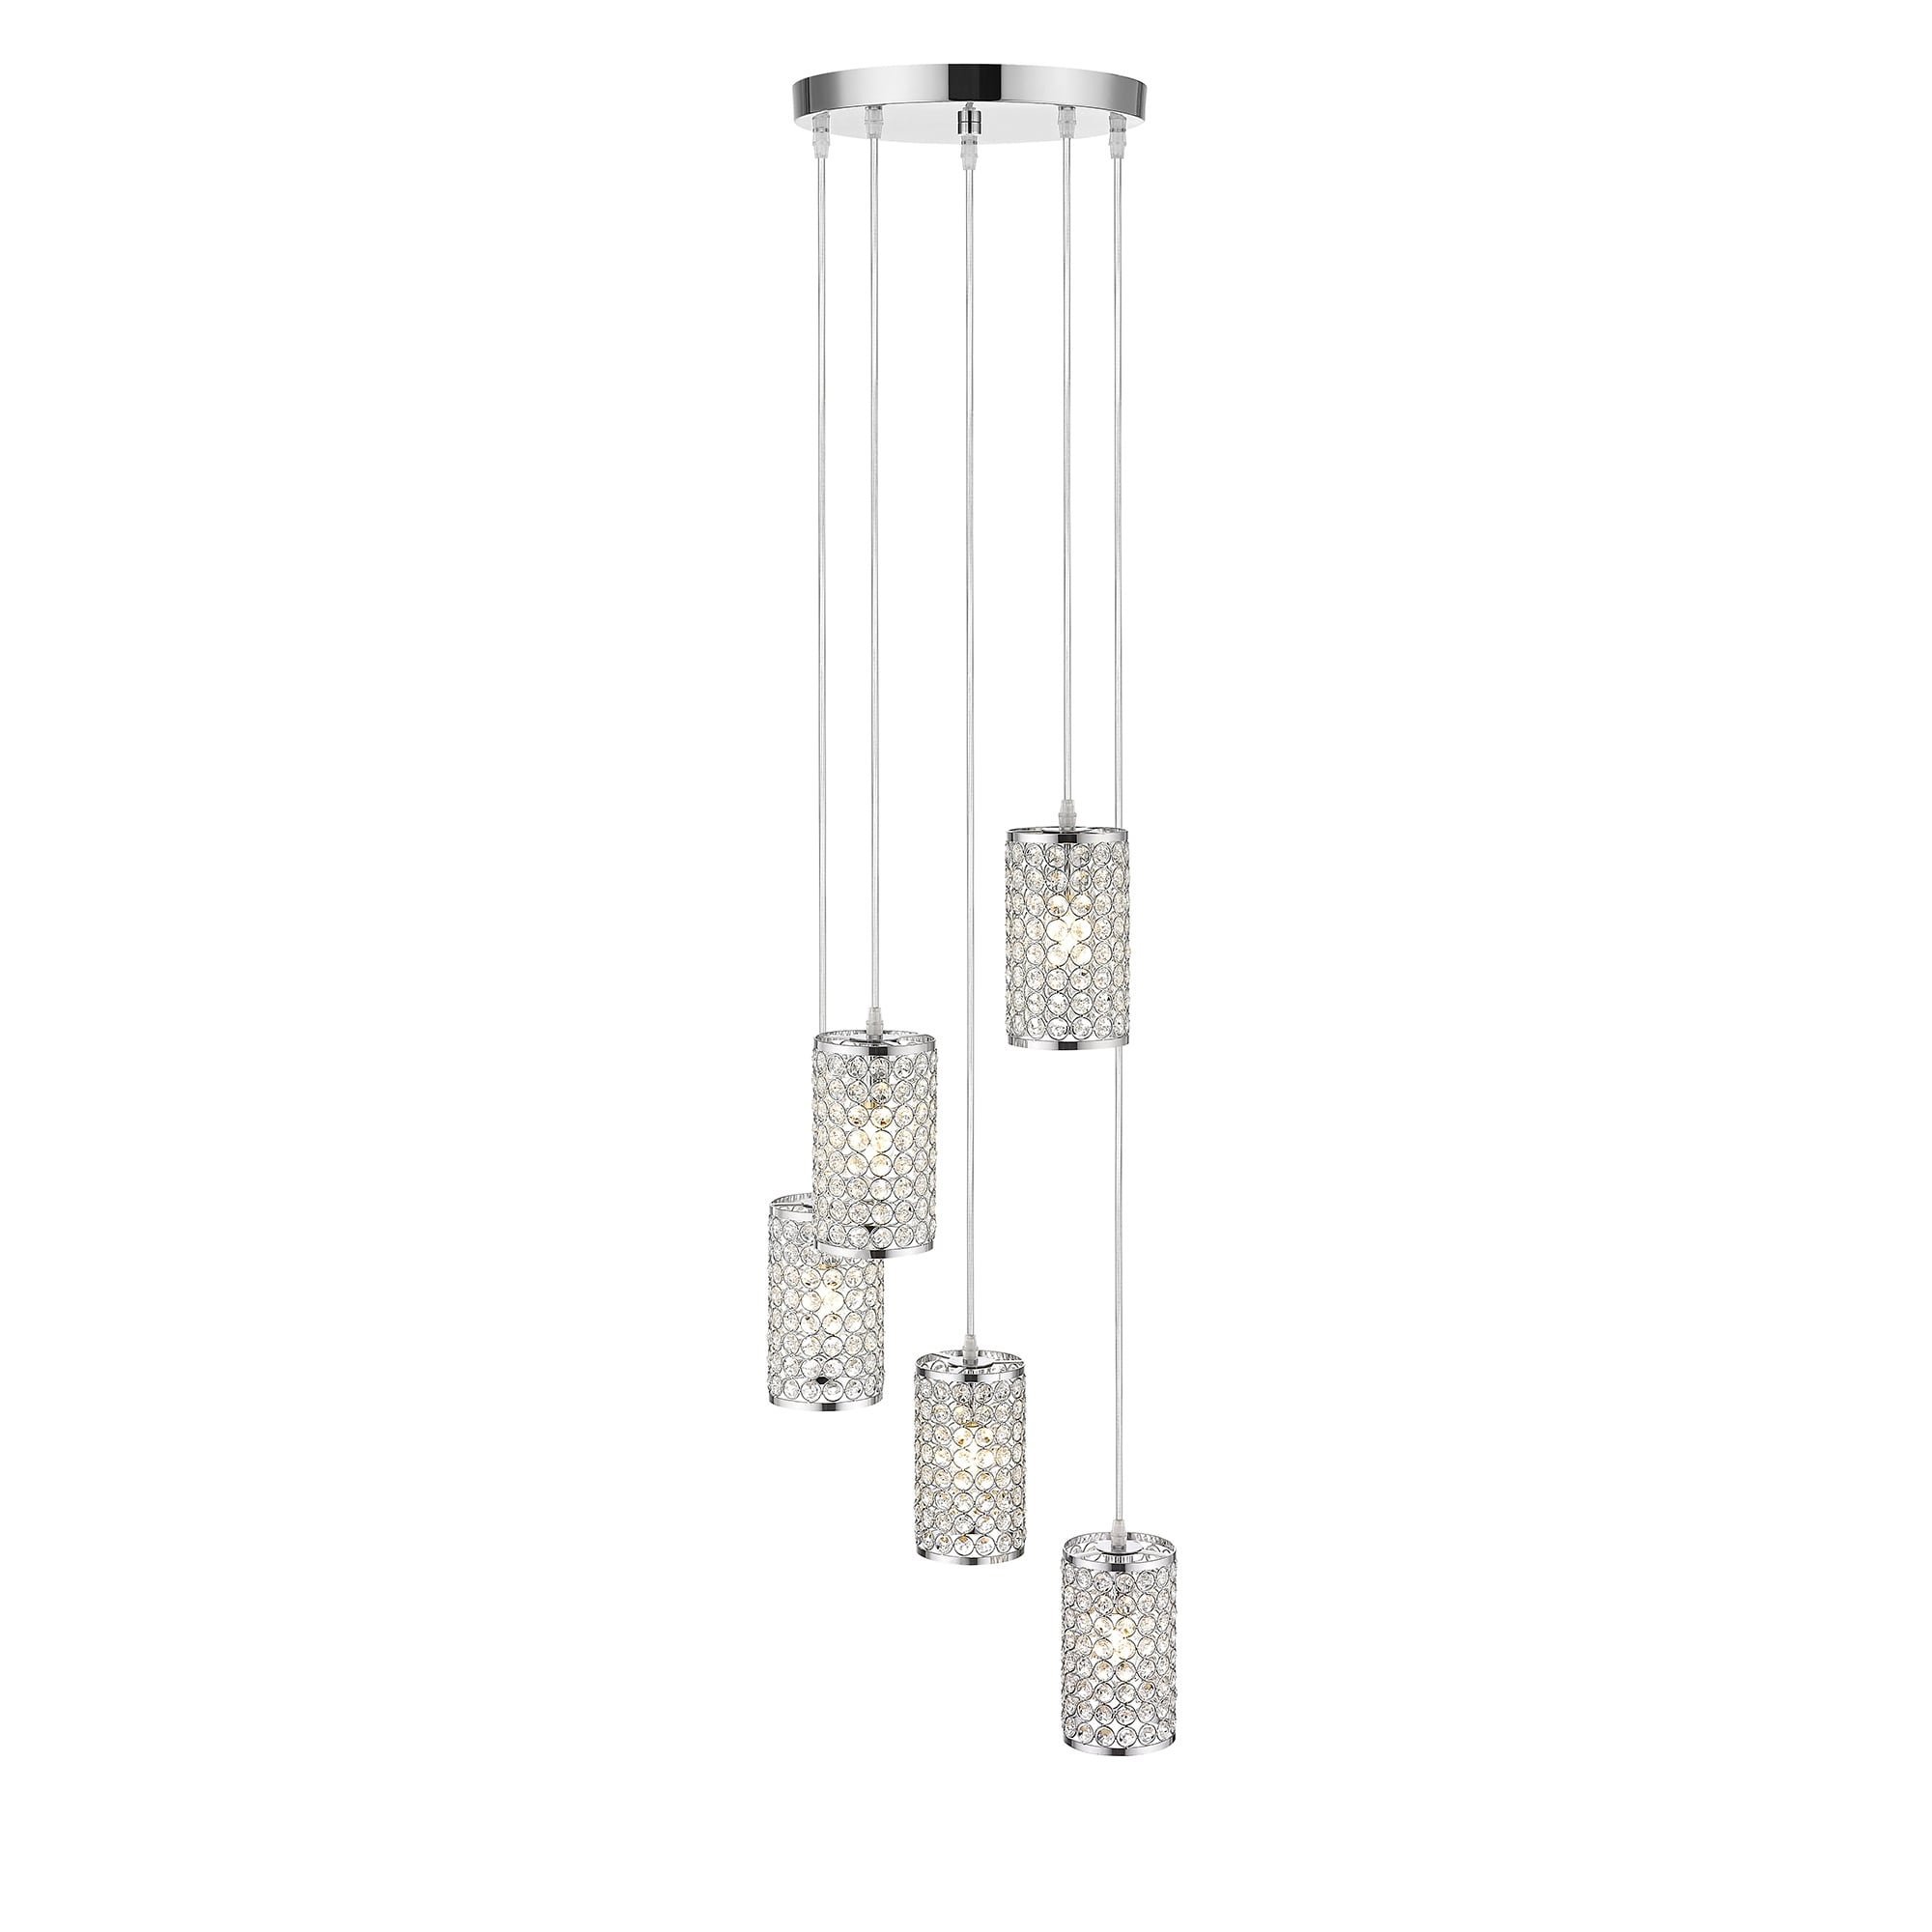 OVE Decors Monaco 5-Light 15 in Ceiling Pendant Light in Chrome  Crystal  finish Bed Bath  Beyond 32207533